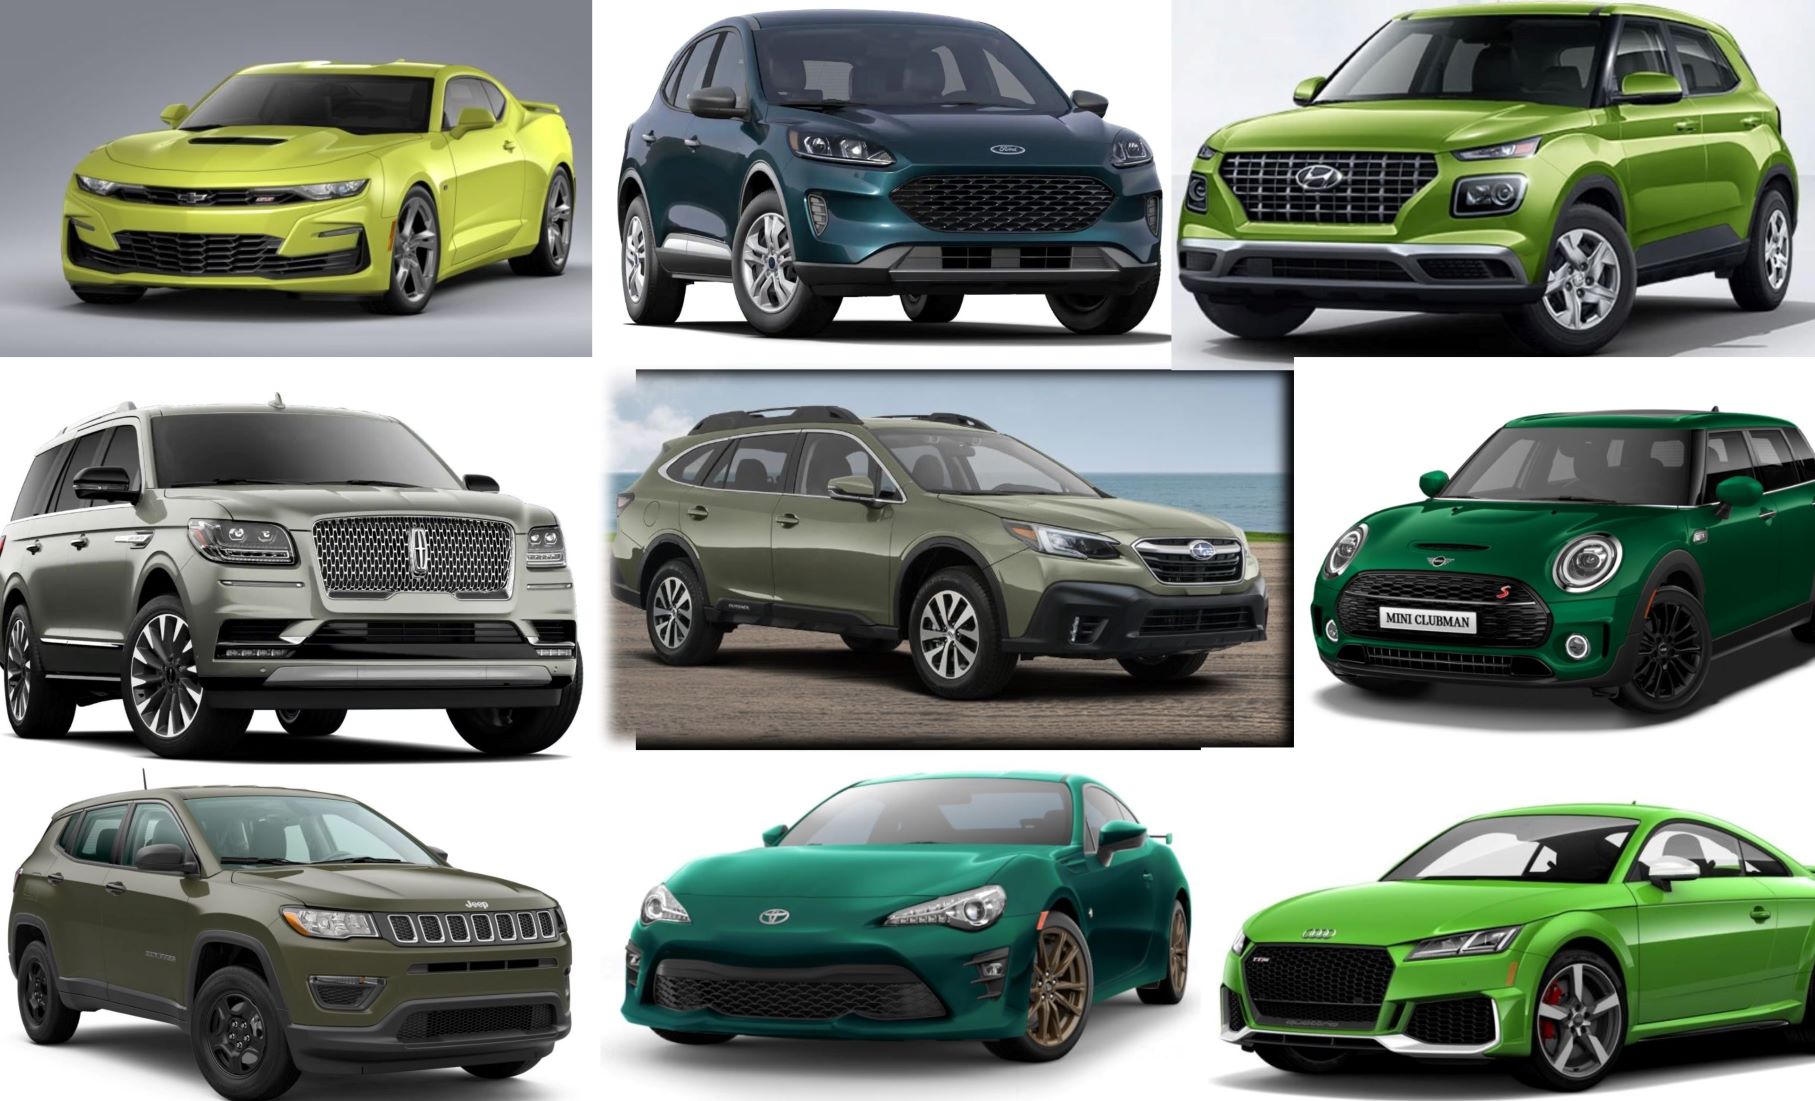 Unusual Car Colors 2020 Models Available in Green The News Wheel